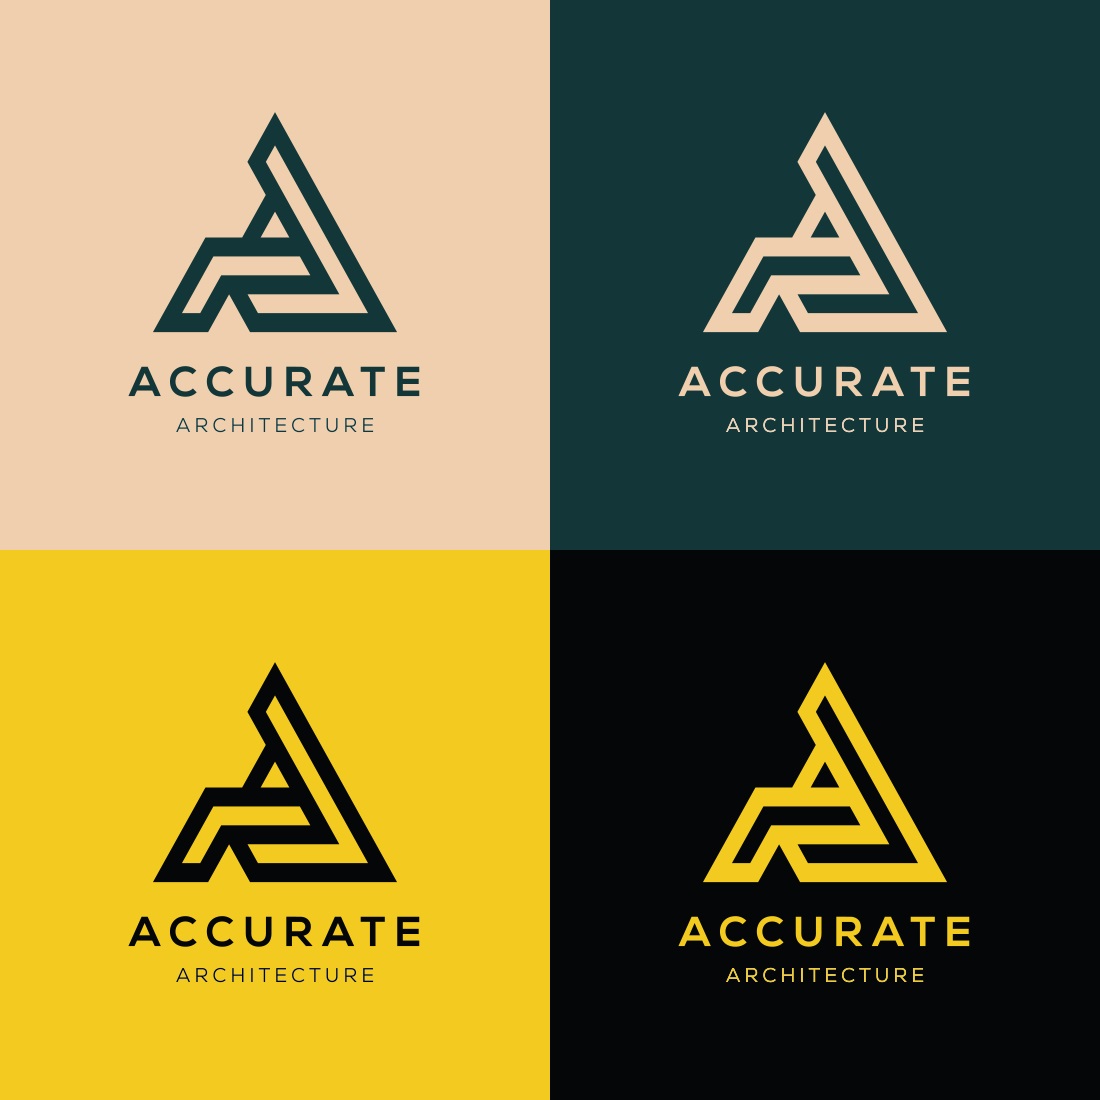 preview image Letter A & Architecture Design Logo Template